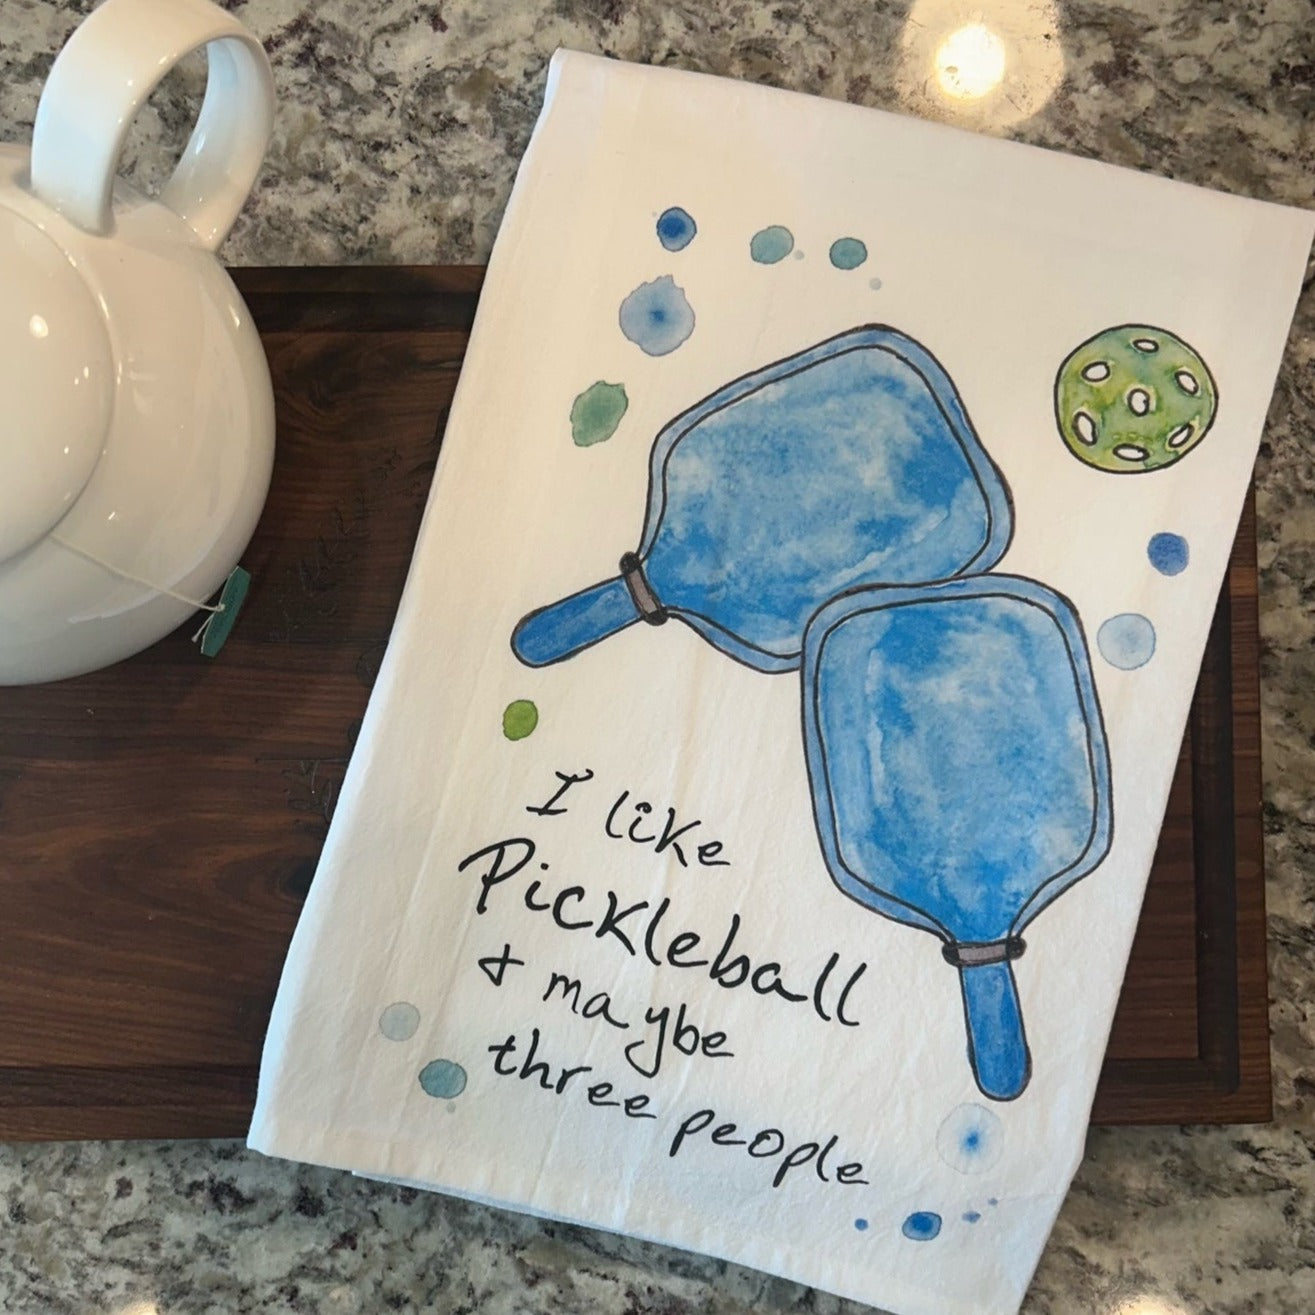 pickleball kitchen towels with I like pickleball and maybe three people text